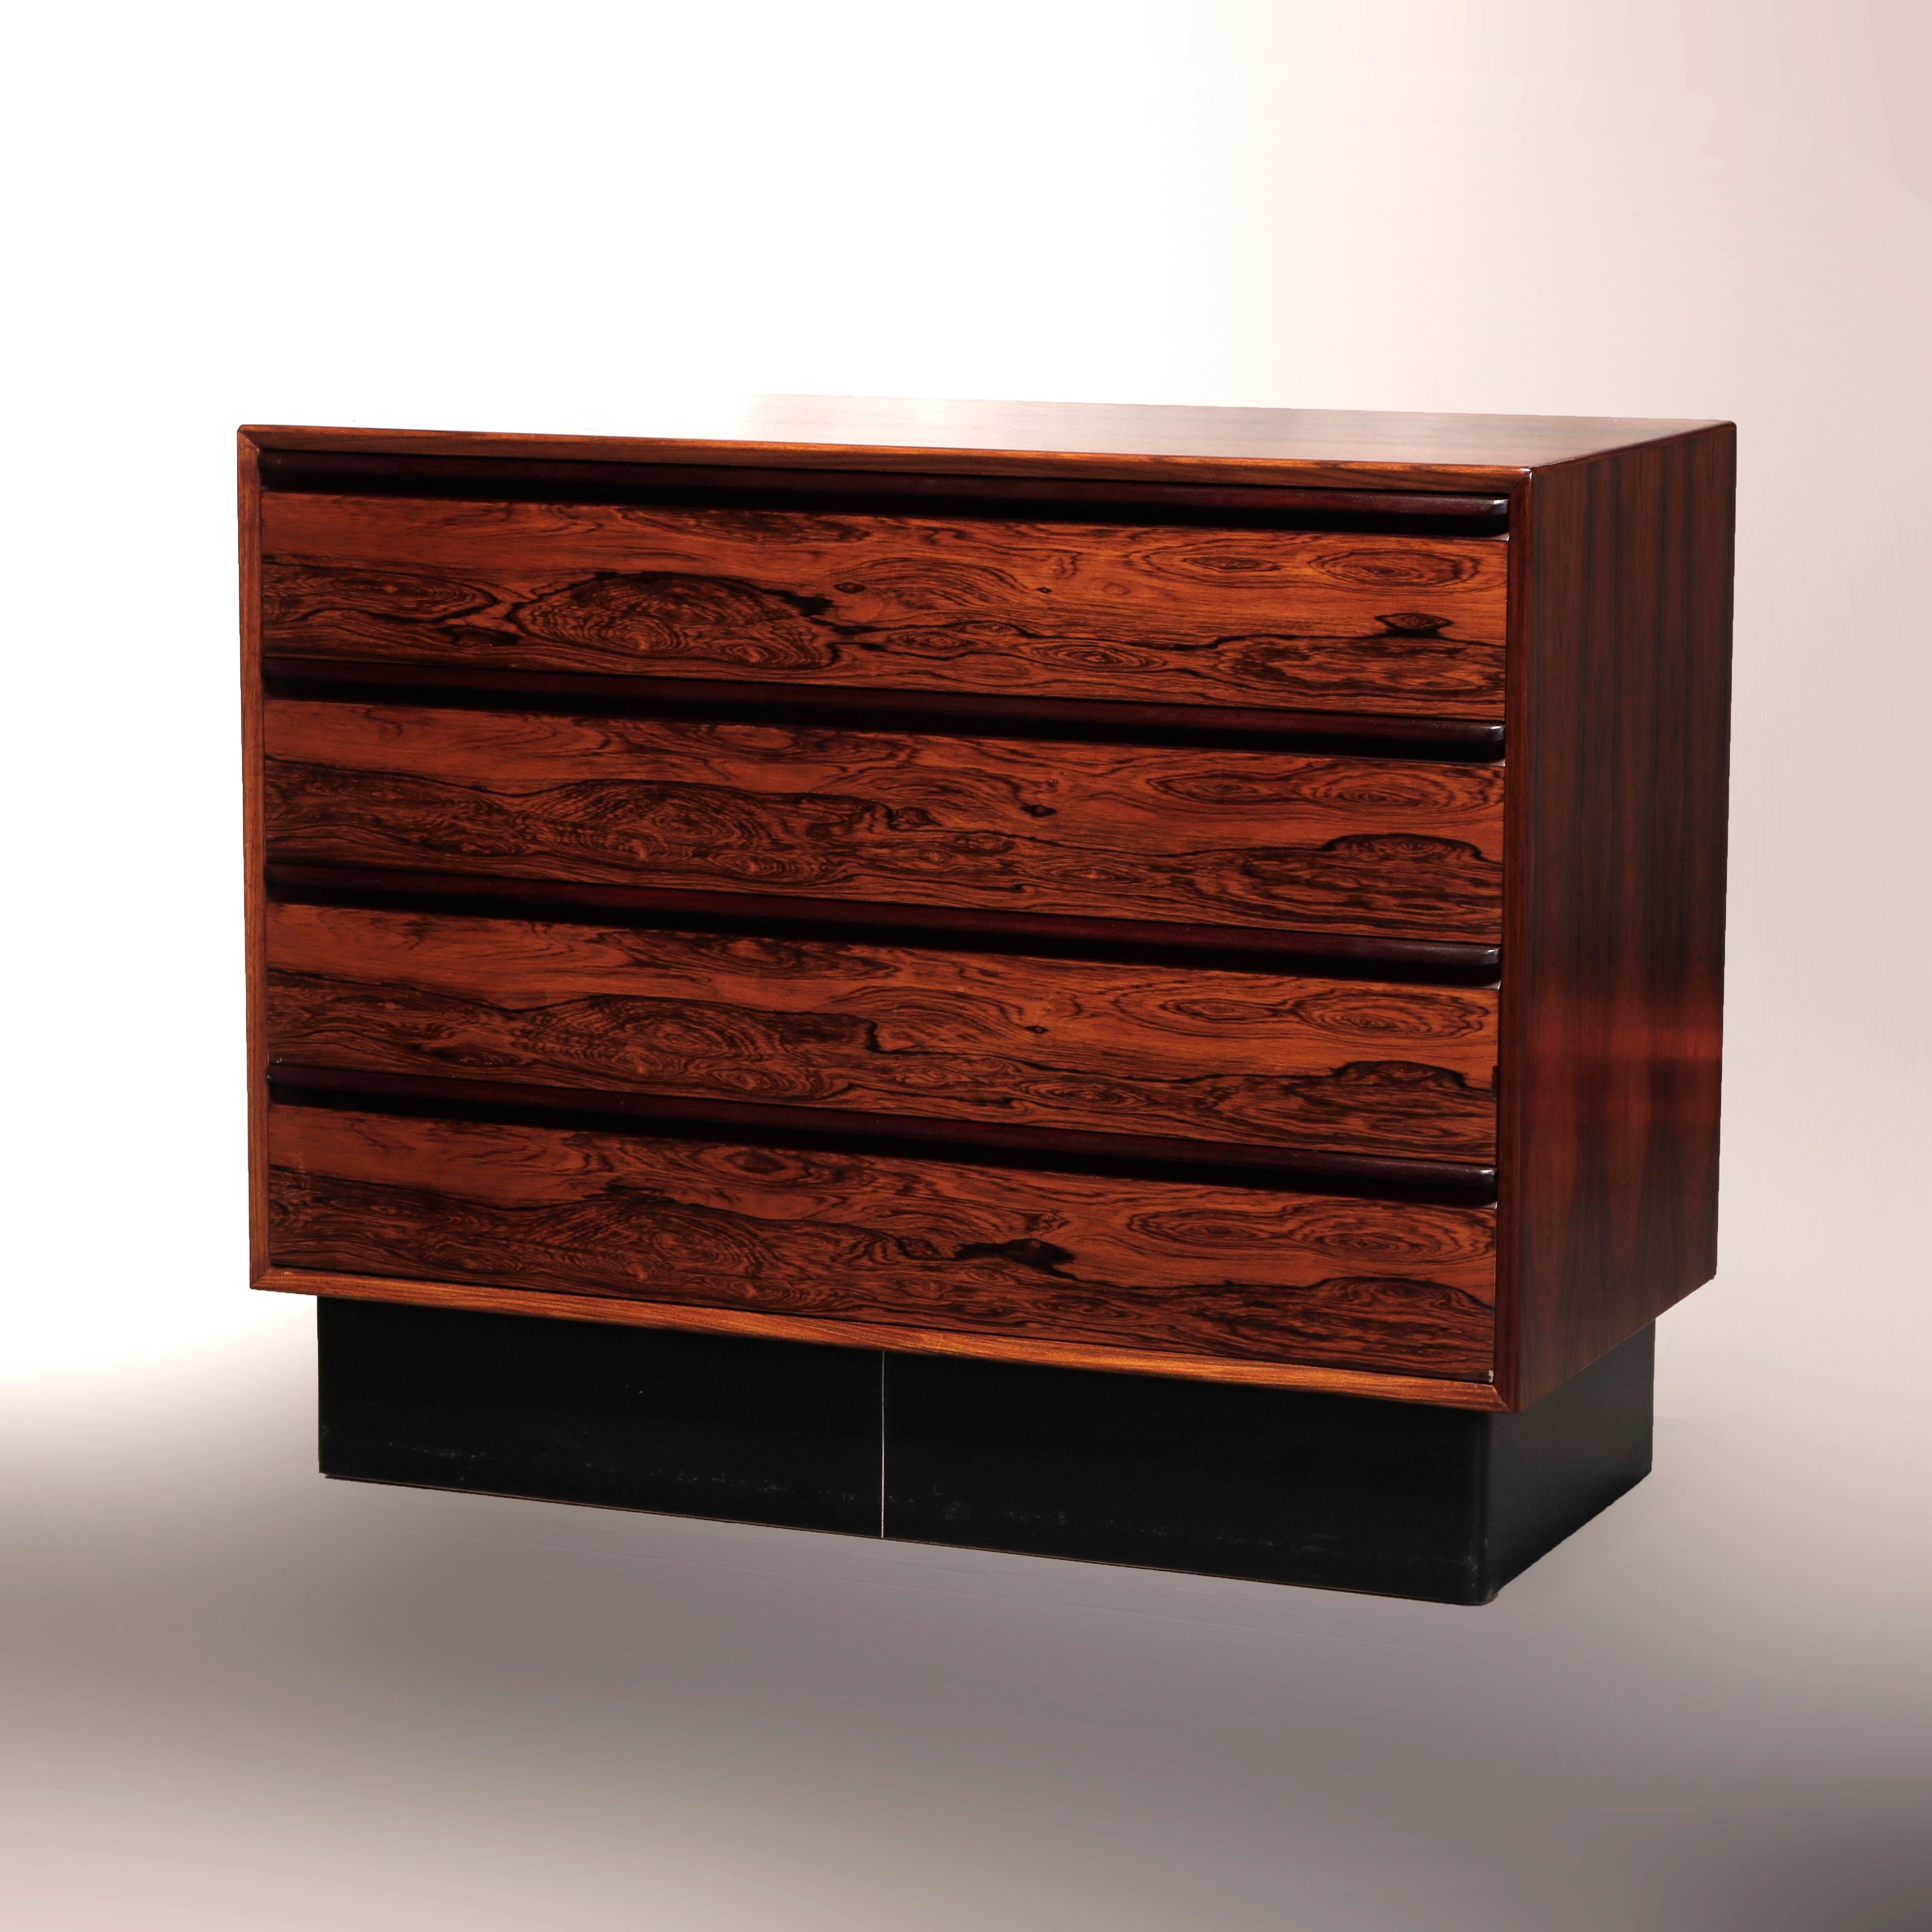 A midcentury Danish modern chest of drawers by Westnofa Furniture of Norway offers rosewood construction with four long drawers, circa 1960.

Measures: 29